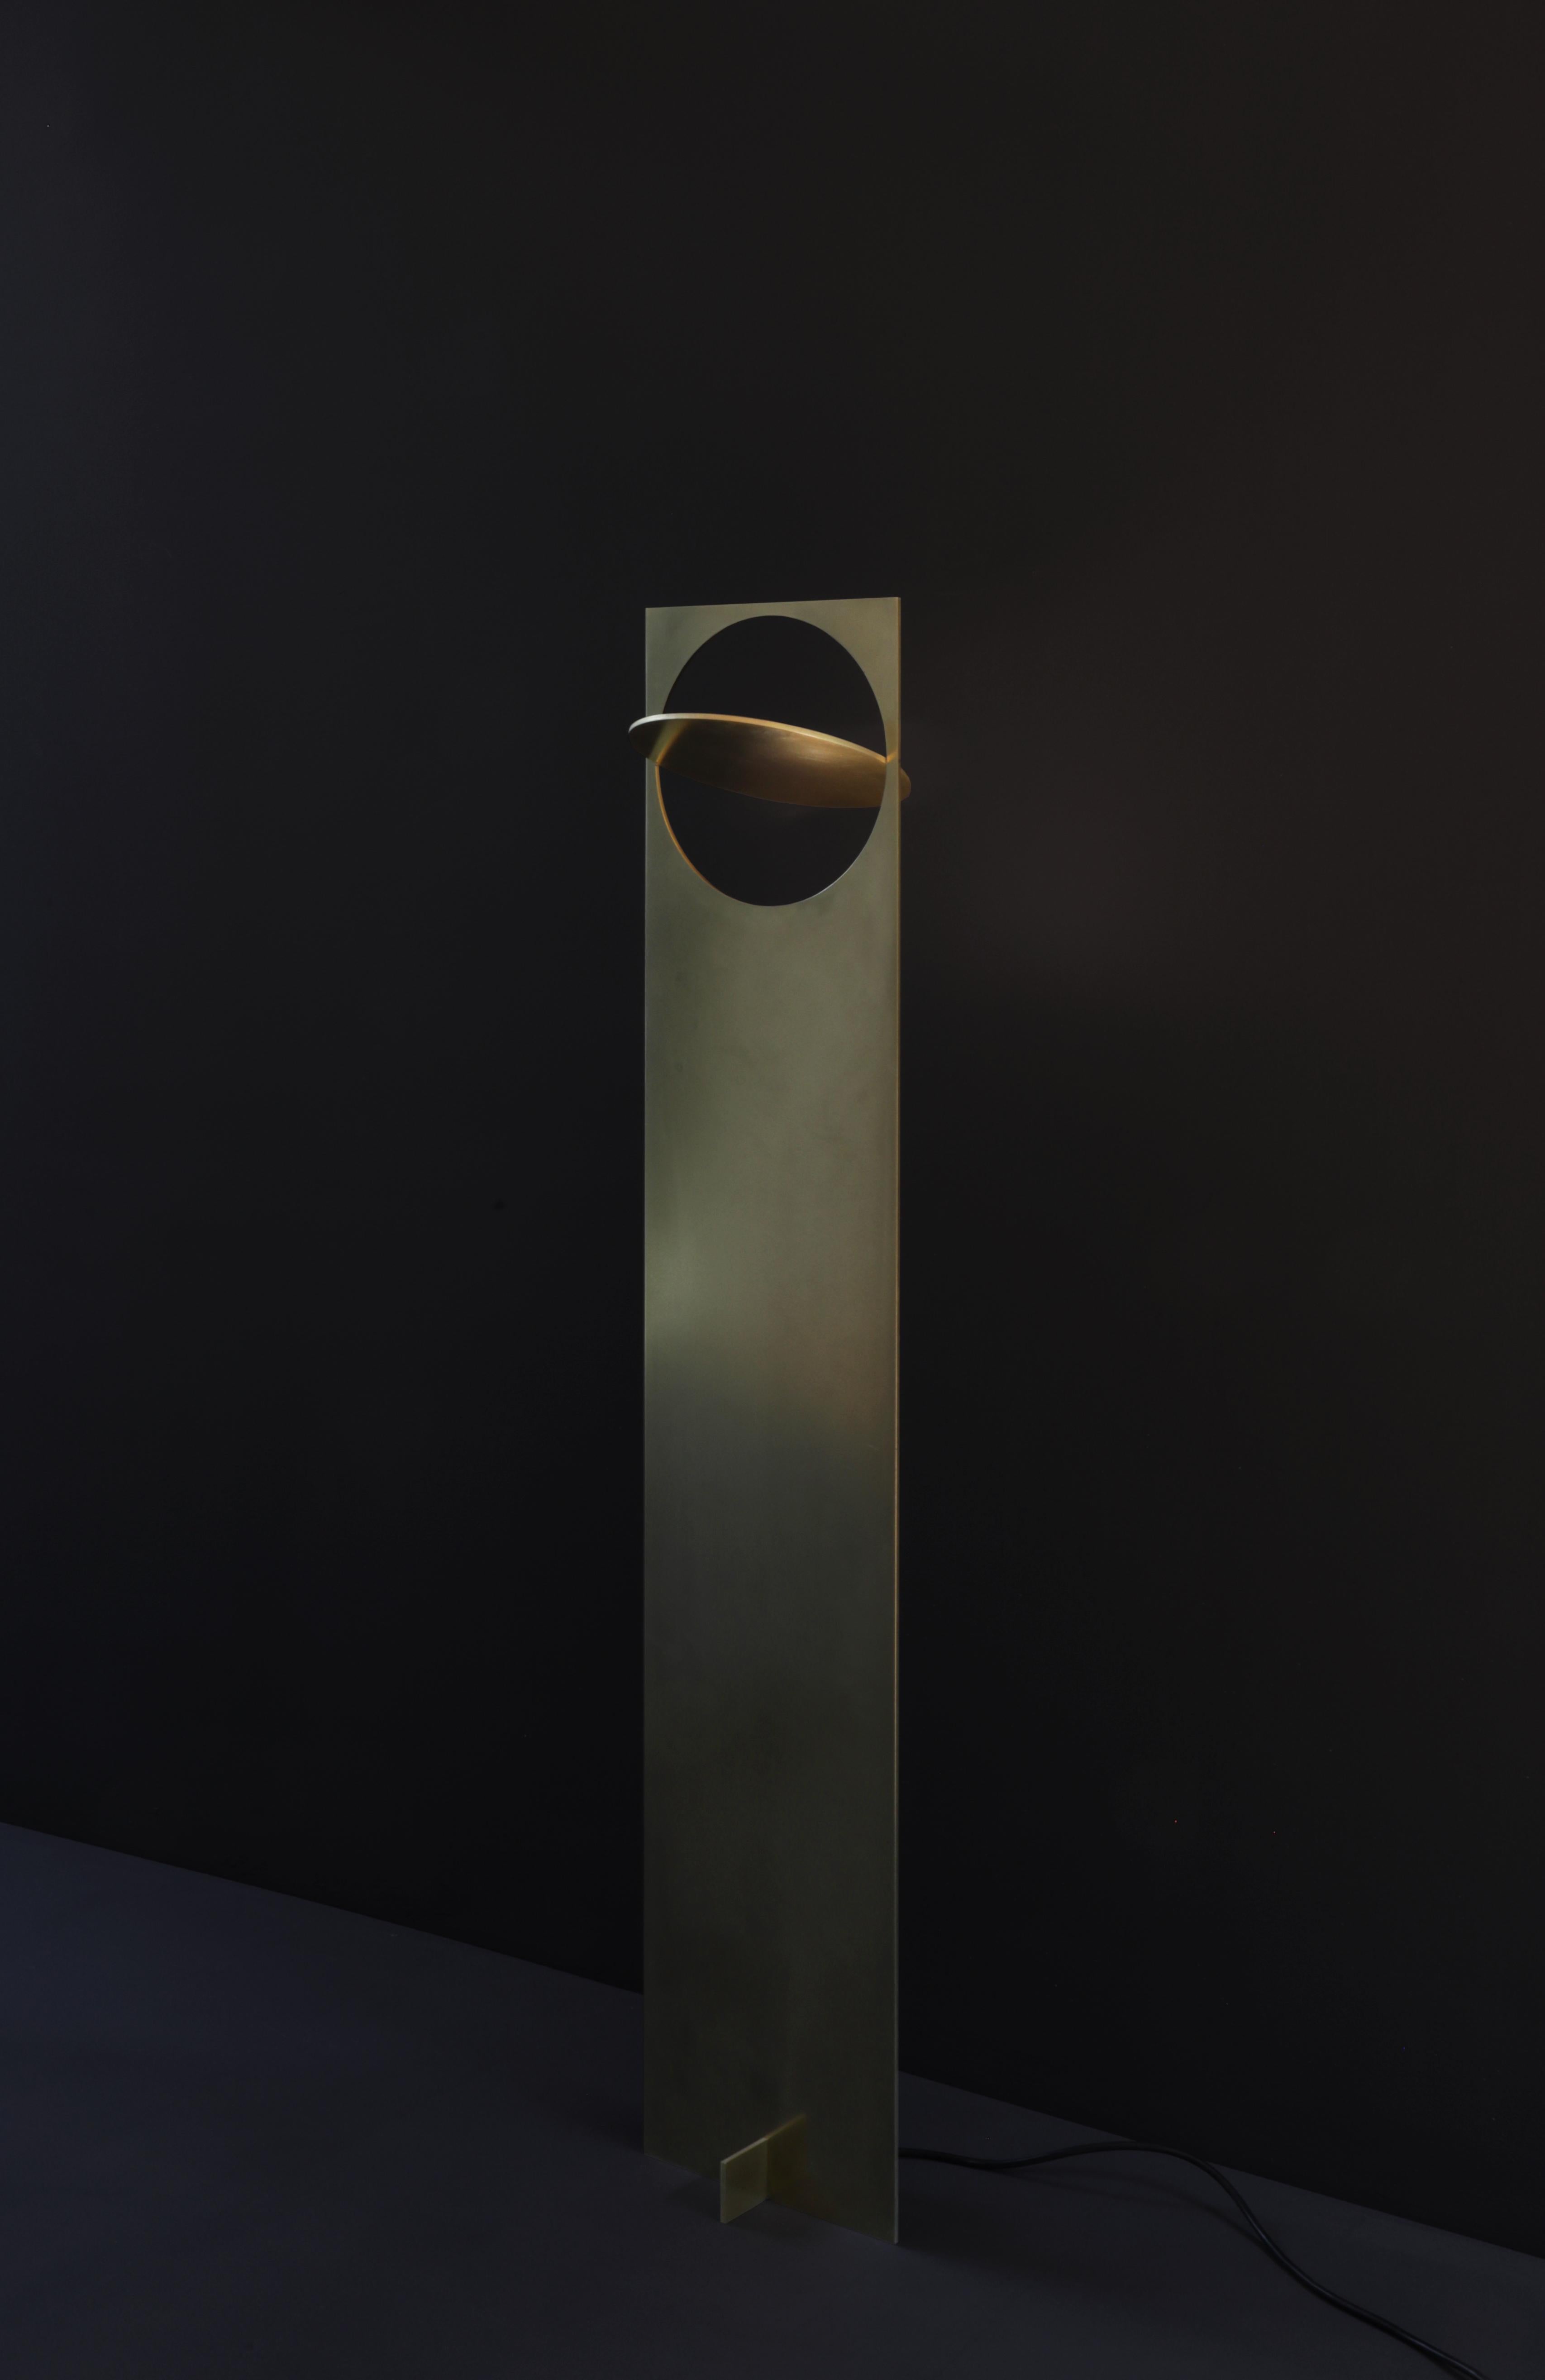 OBJ-01 brass floor lamp by Manu Bano
Dimensions: H 122 x W 24 x D 12 cm
Material: brass.

All lamps are wired for the US, but voltage converter is available for other countries. 

OBJ-01 is an understandable simple gesture, an object that